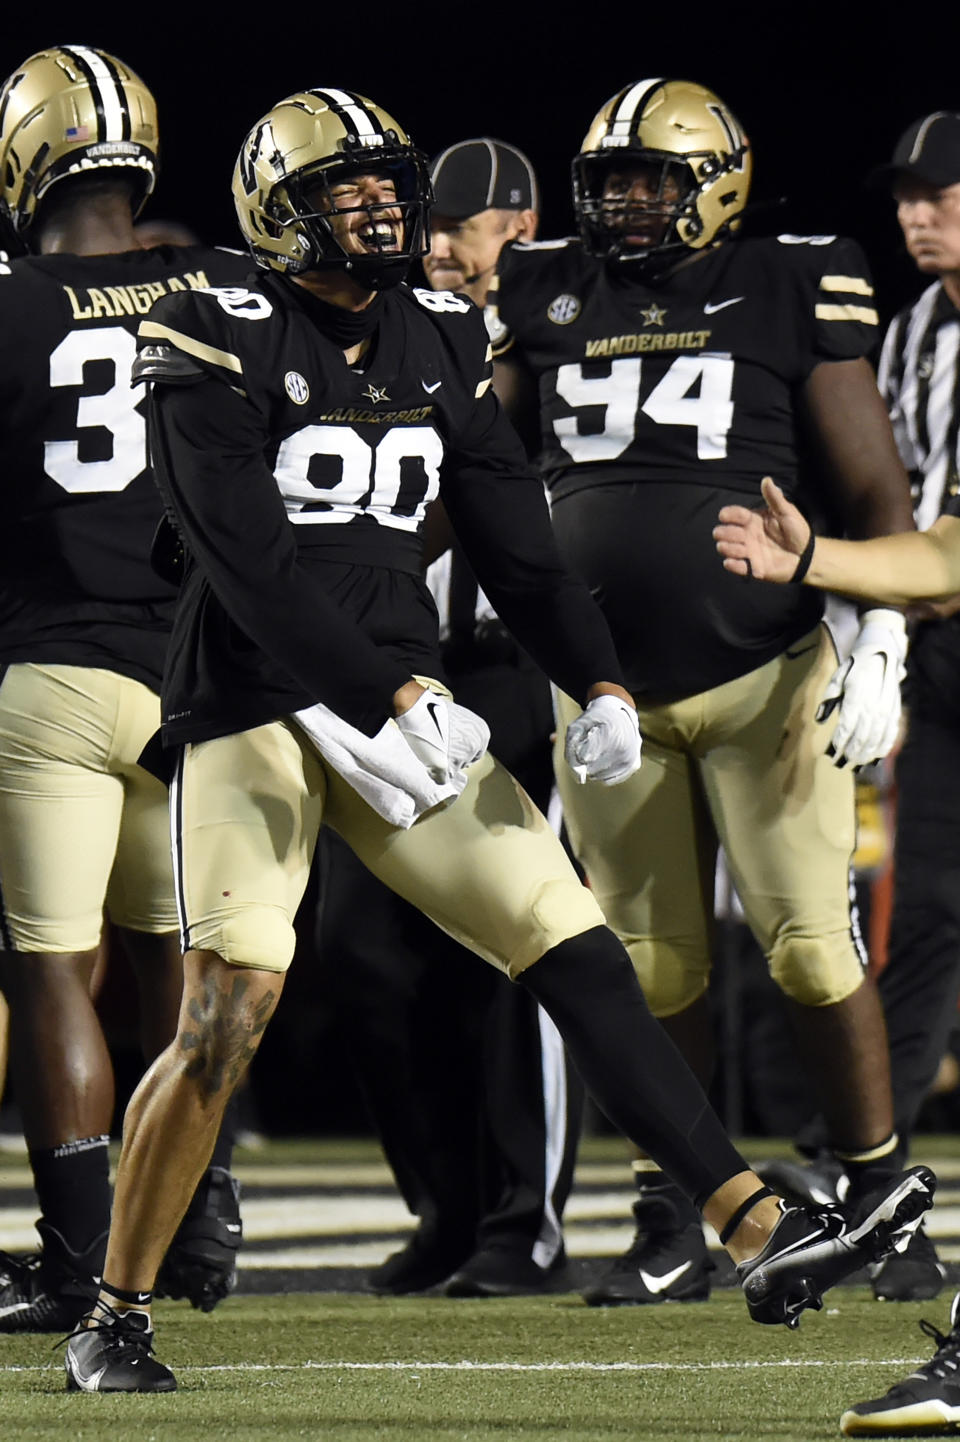 Vanderbilt defensive lineman Alex Williams (80) celebrates after the defense stopped Stanford at the goal line in the first half of an NCAA college football game Saturday, Sept. 18, 2021, in Nashville, Tenn. (AP Photo/Mark Zaleski)